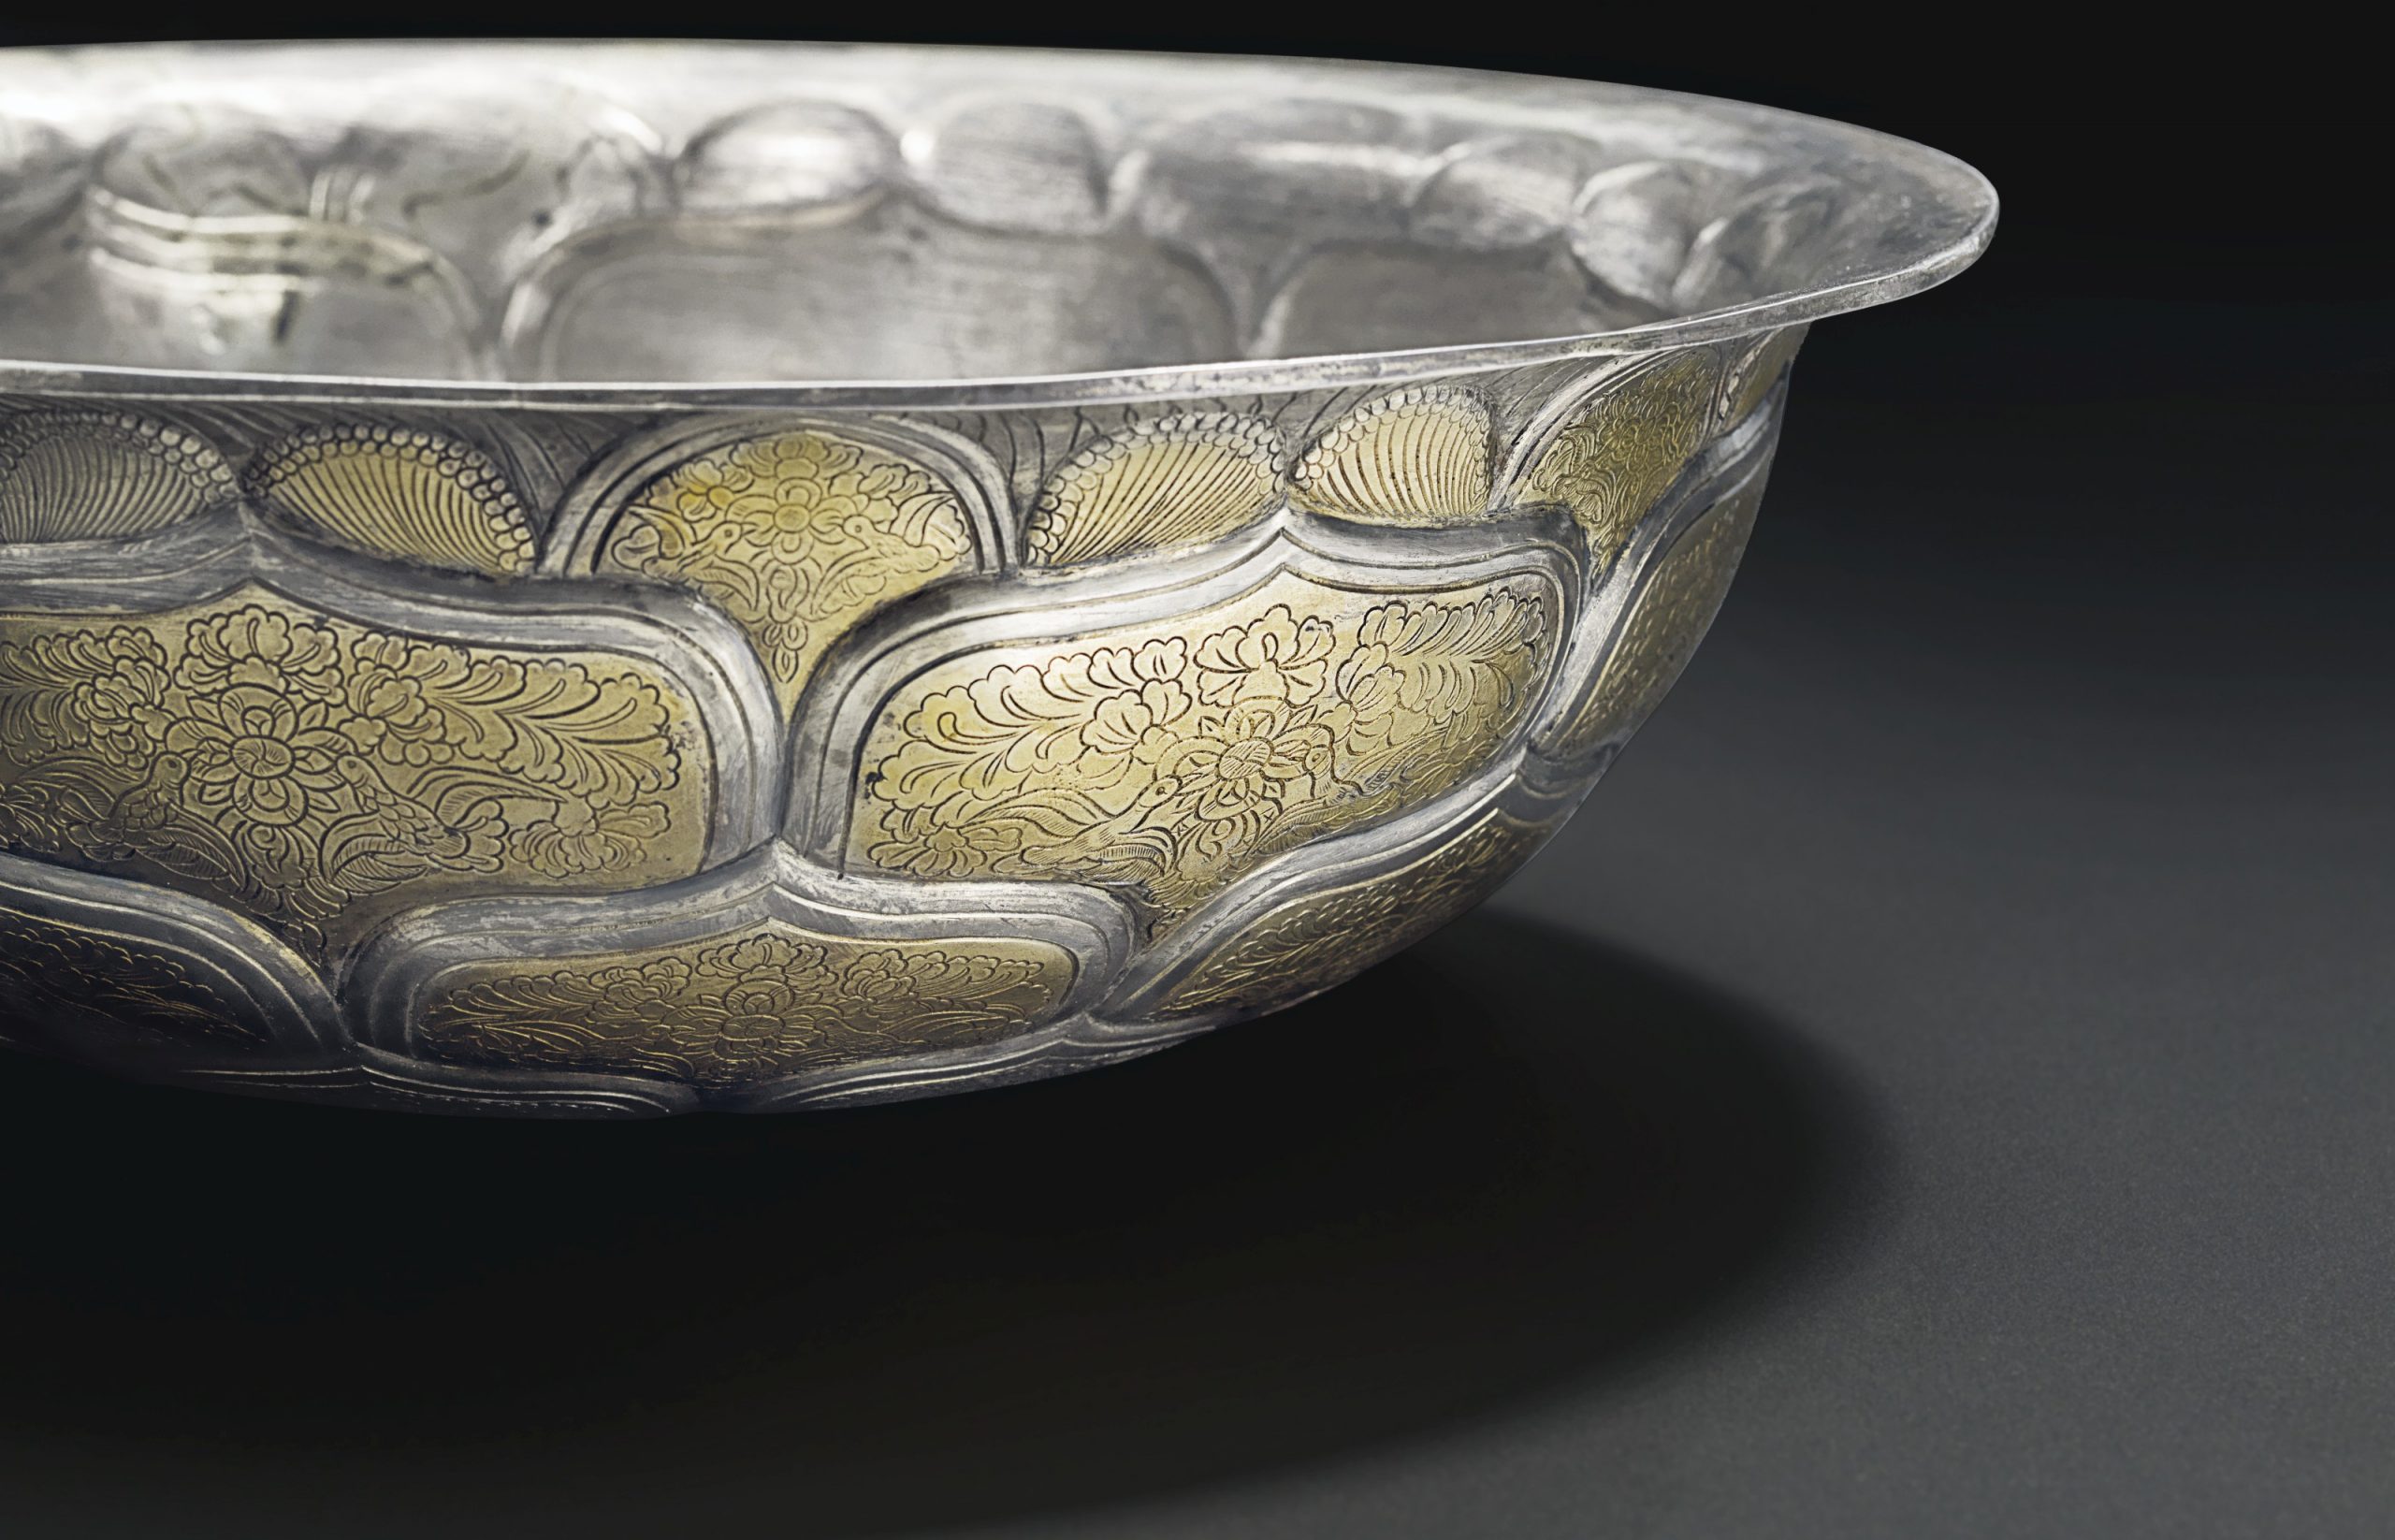 A VERY RARE AND IMPORTANT LARGE PARCEL-GILT SILVER BOWL